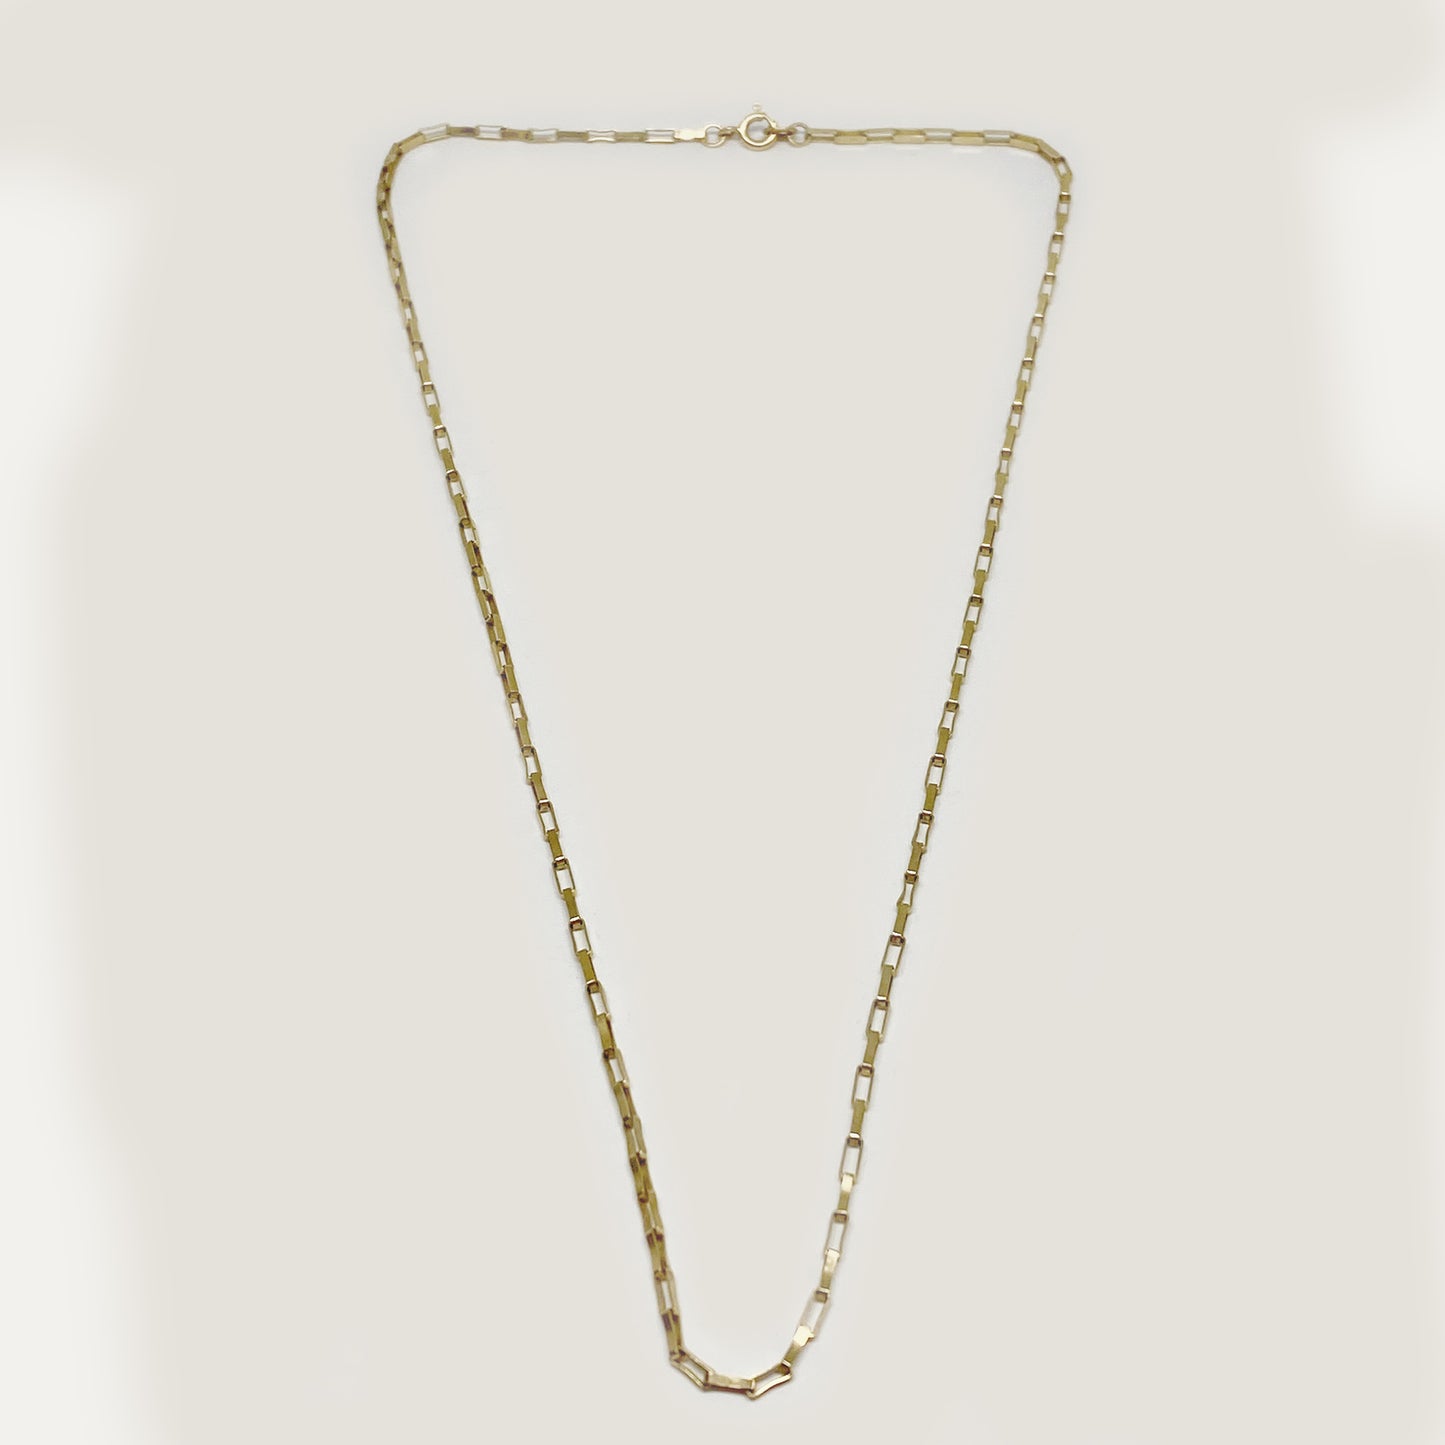 Vintage 9k Gold Elongated Rectangle Chain Necklace